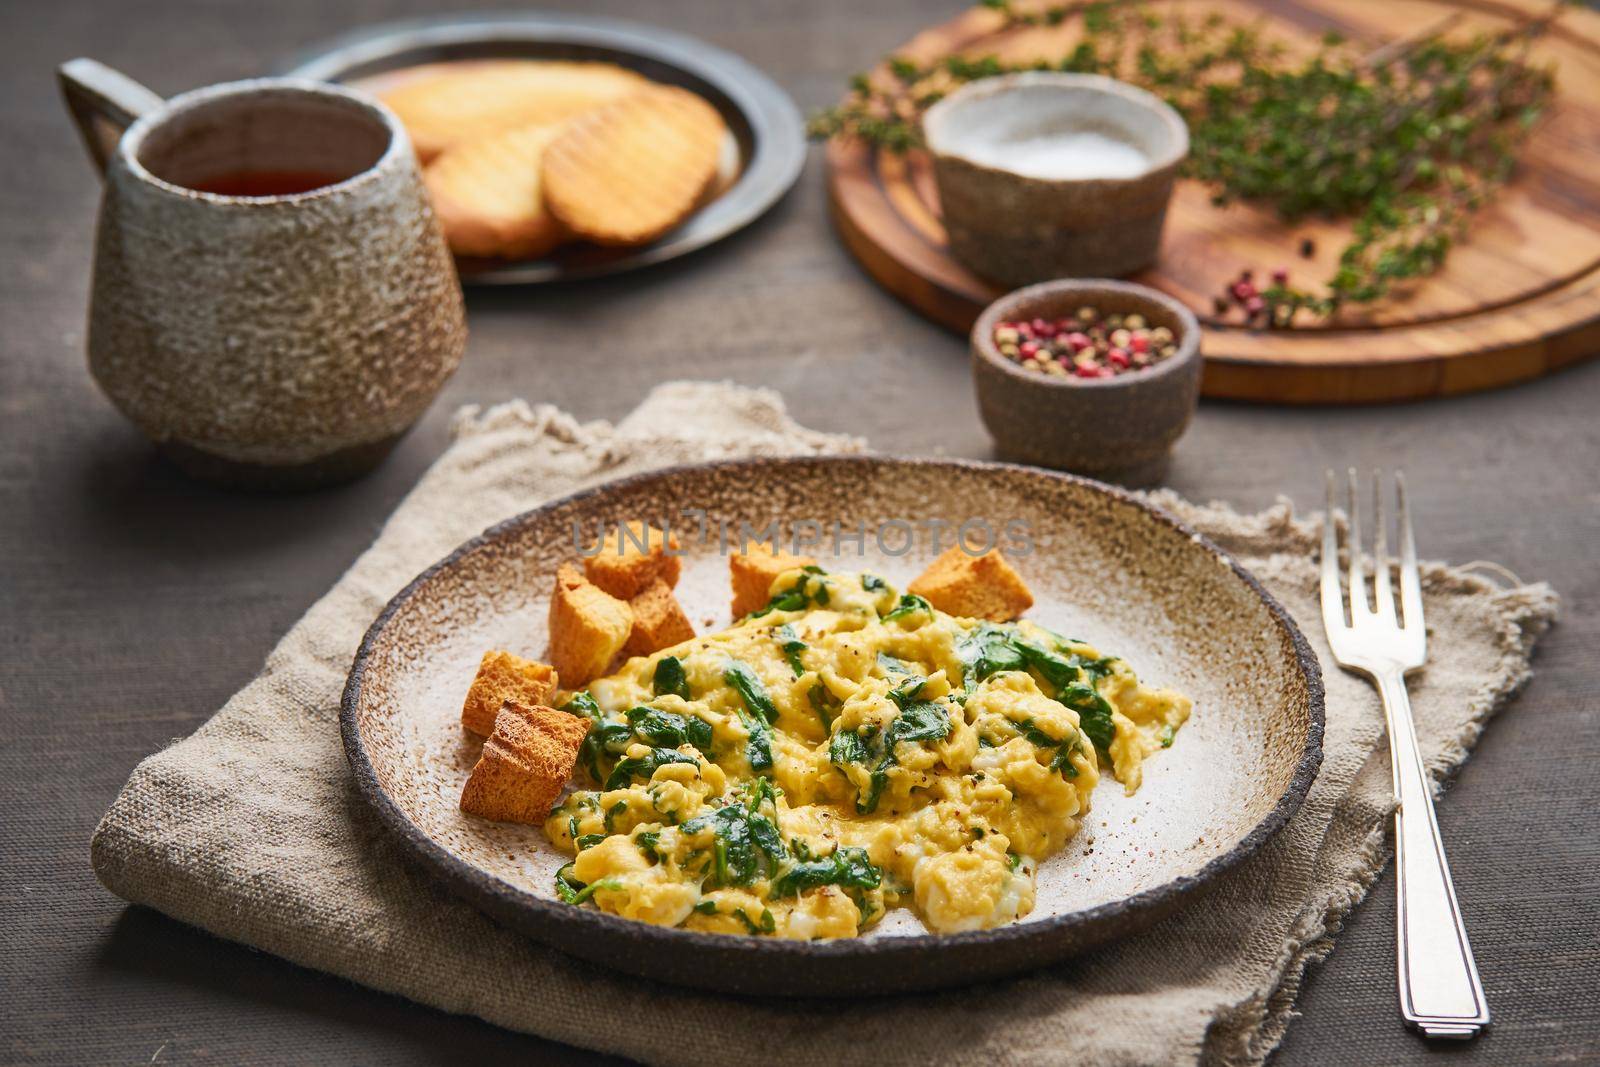 Scrambled eggs with spinach, cup of tea on dark brown background. Breakfast with Pan-fried omelette, side view, close up